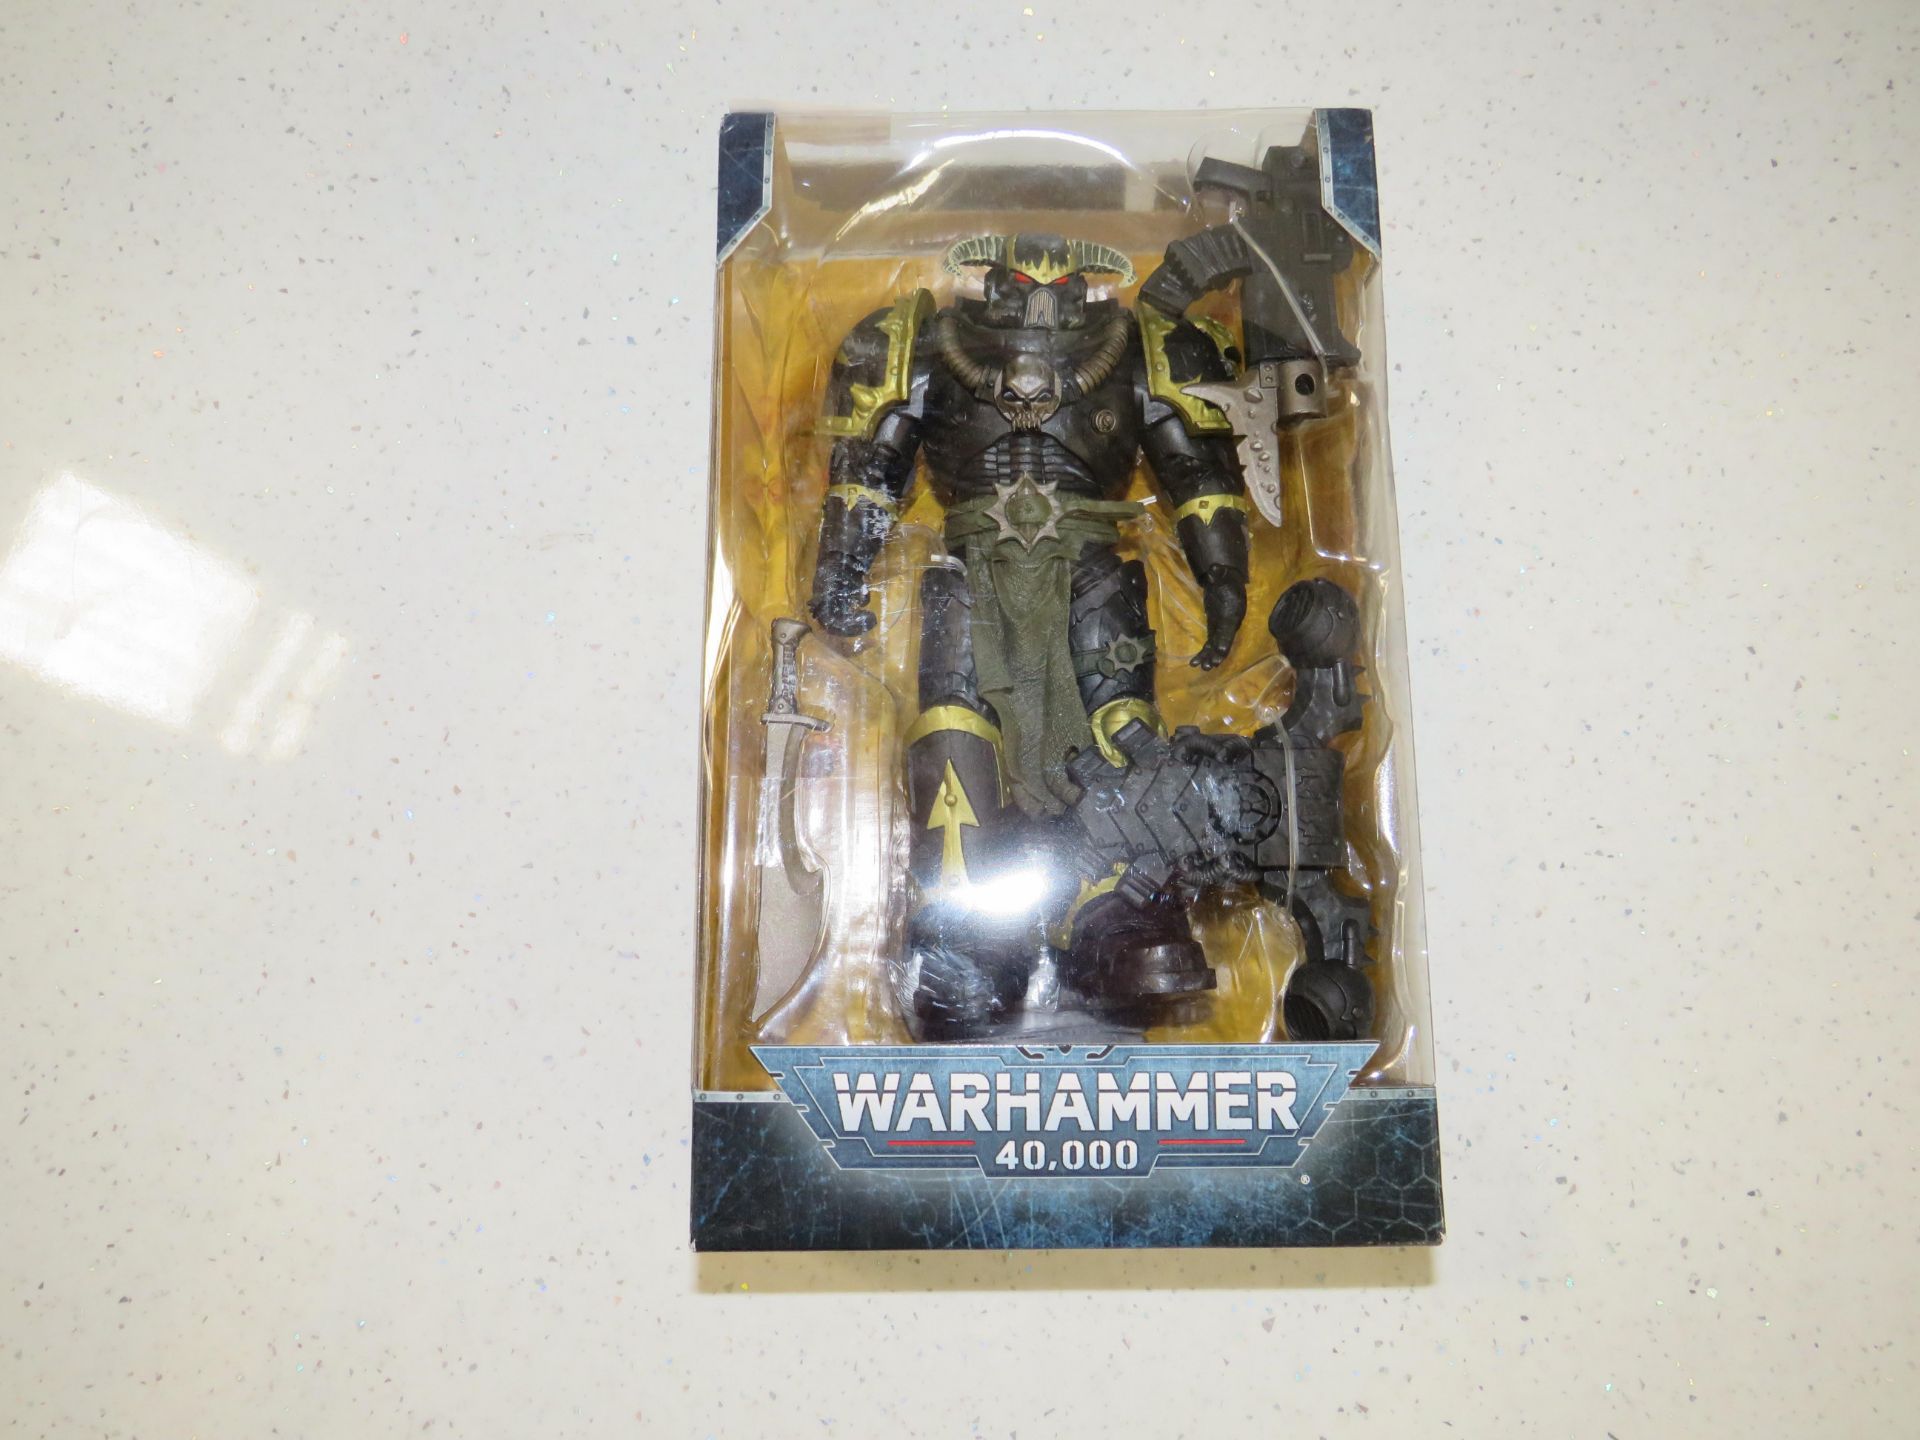 Warhammer 40,000 - Chaos Space Marine Ornament Toy - Good Condition & Packaged.